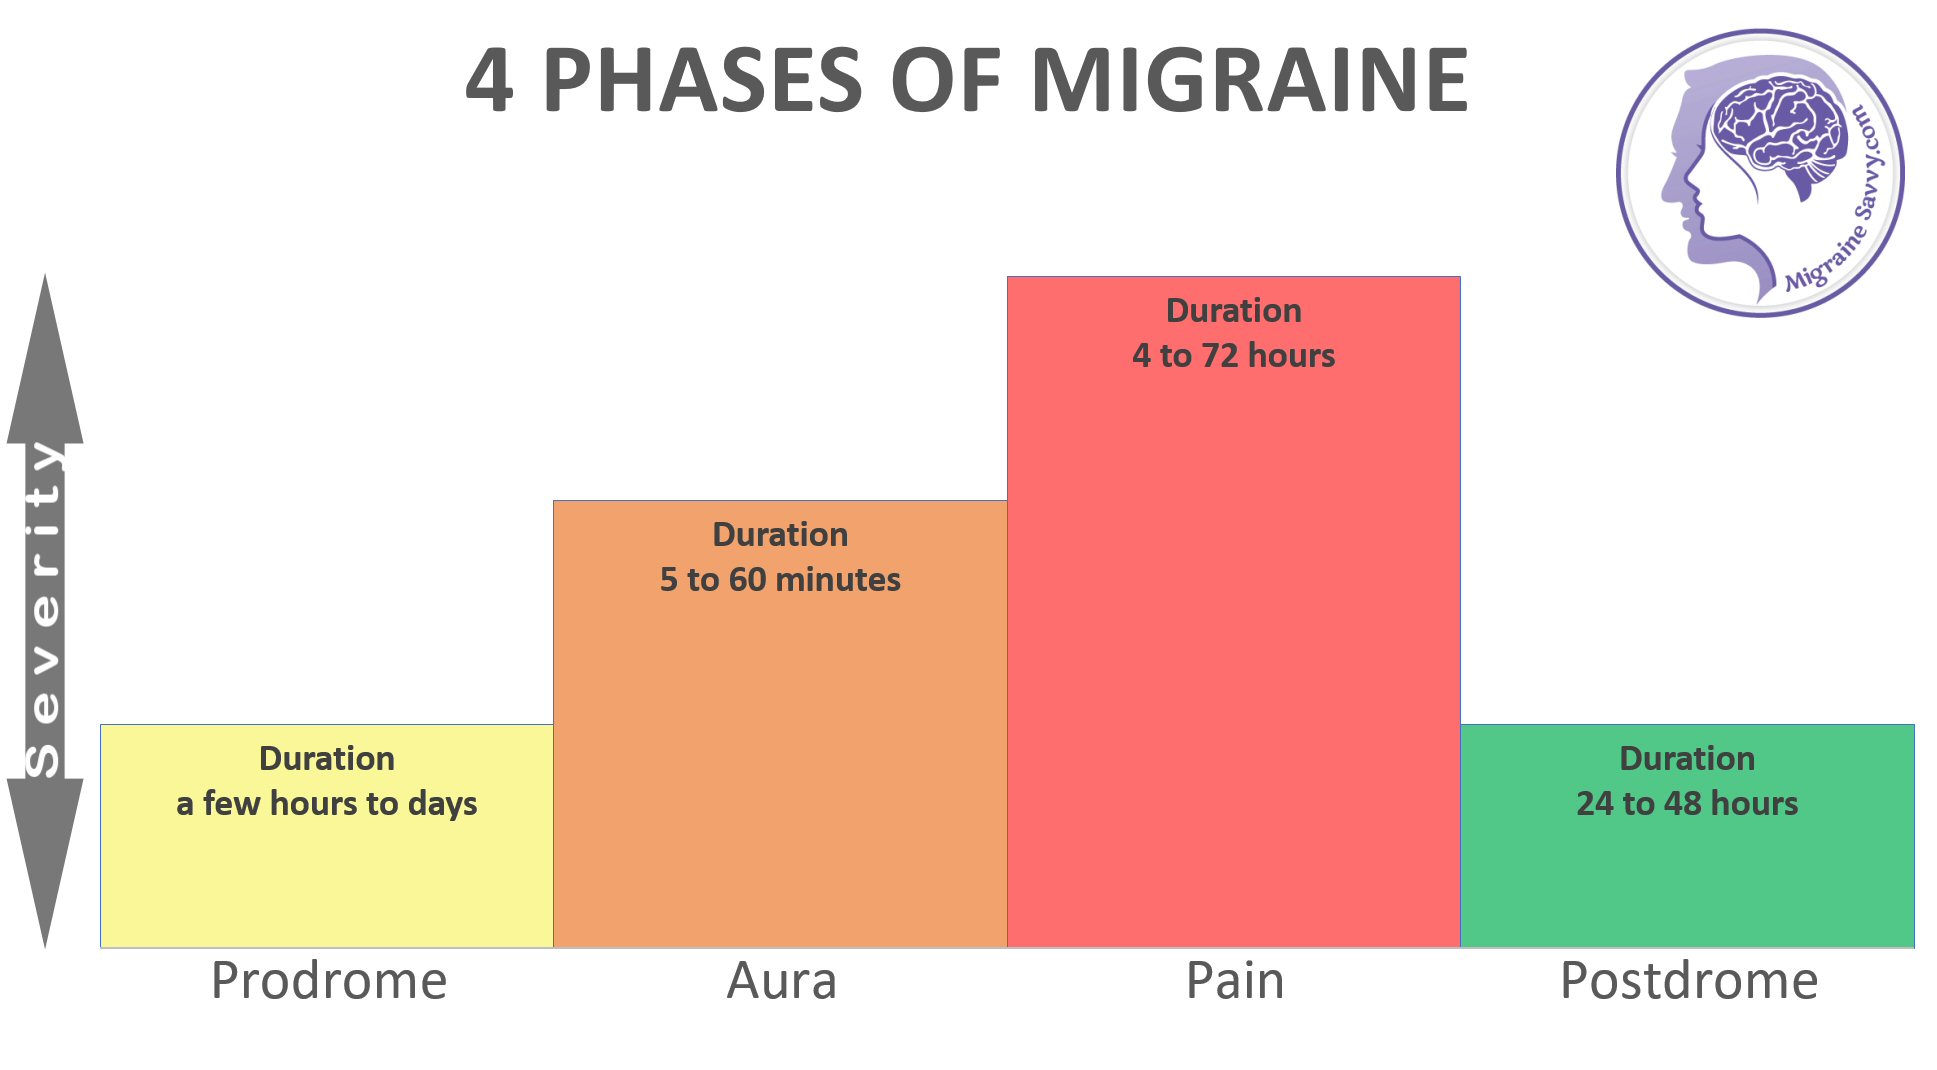 What is a complicated migraine called?